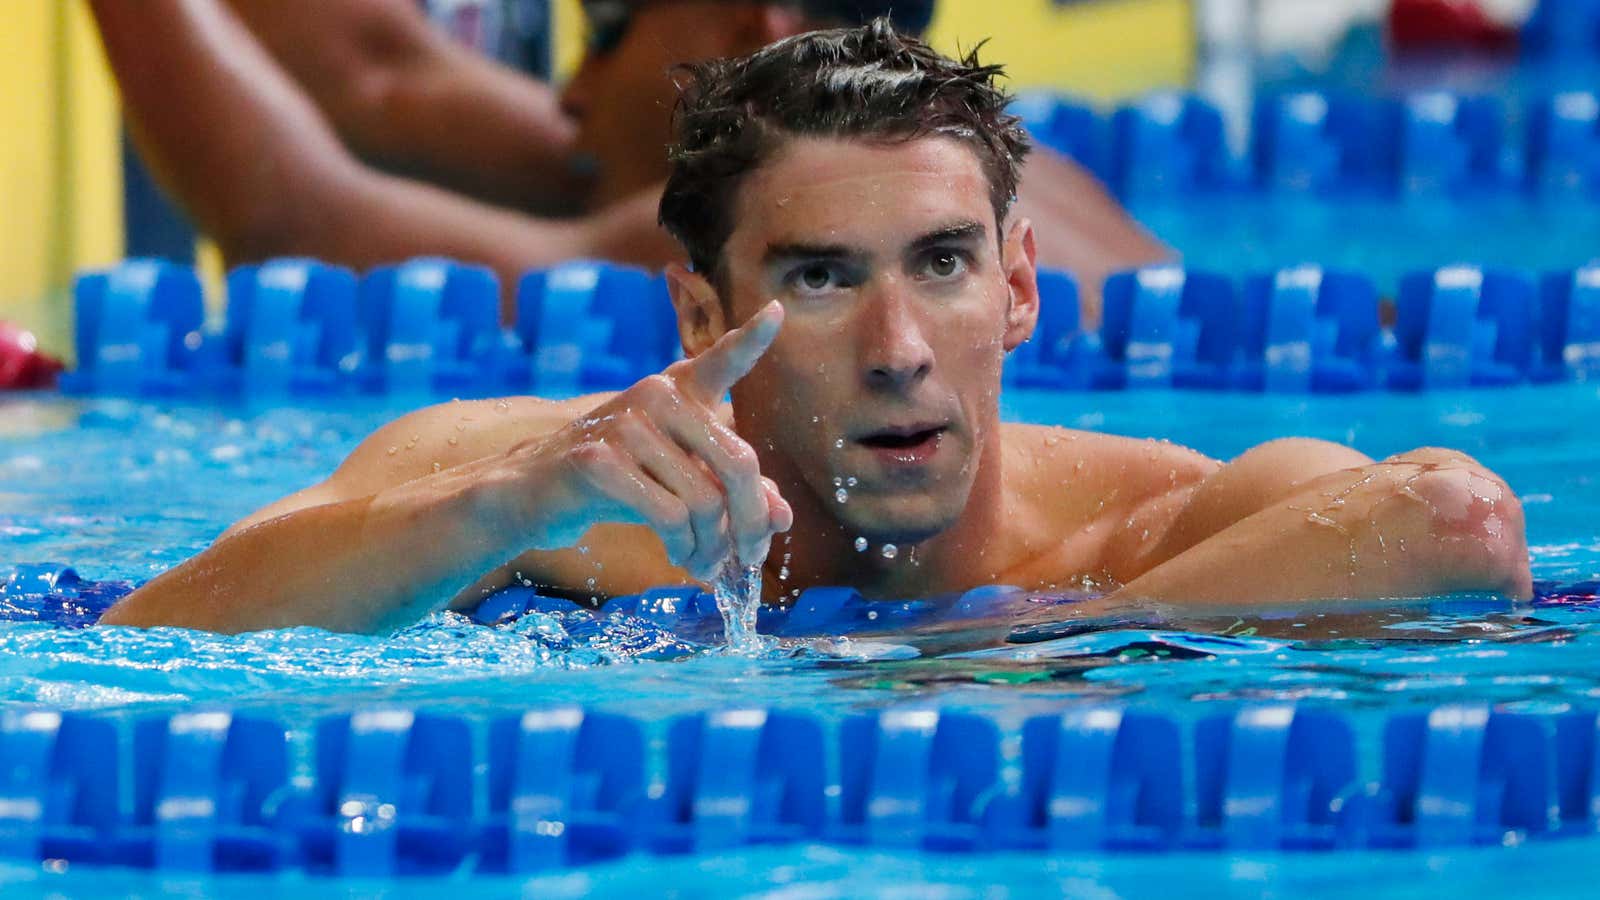 July 2, 2016; Omaha, NE, USA; Michael Phelps reacts after the men’s 100m butterfly finals in the U.S. Olympic swimming team trials at CenturyLink Center. Mandatory Credit: Erich Schlegel-USA TODAY Sports – RTX2JFWH